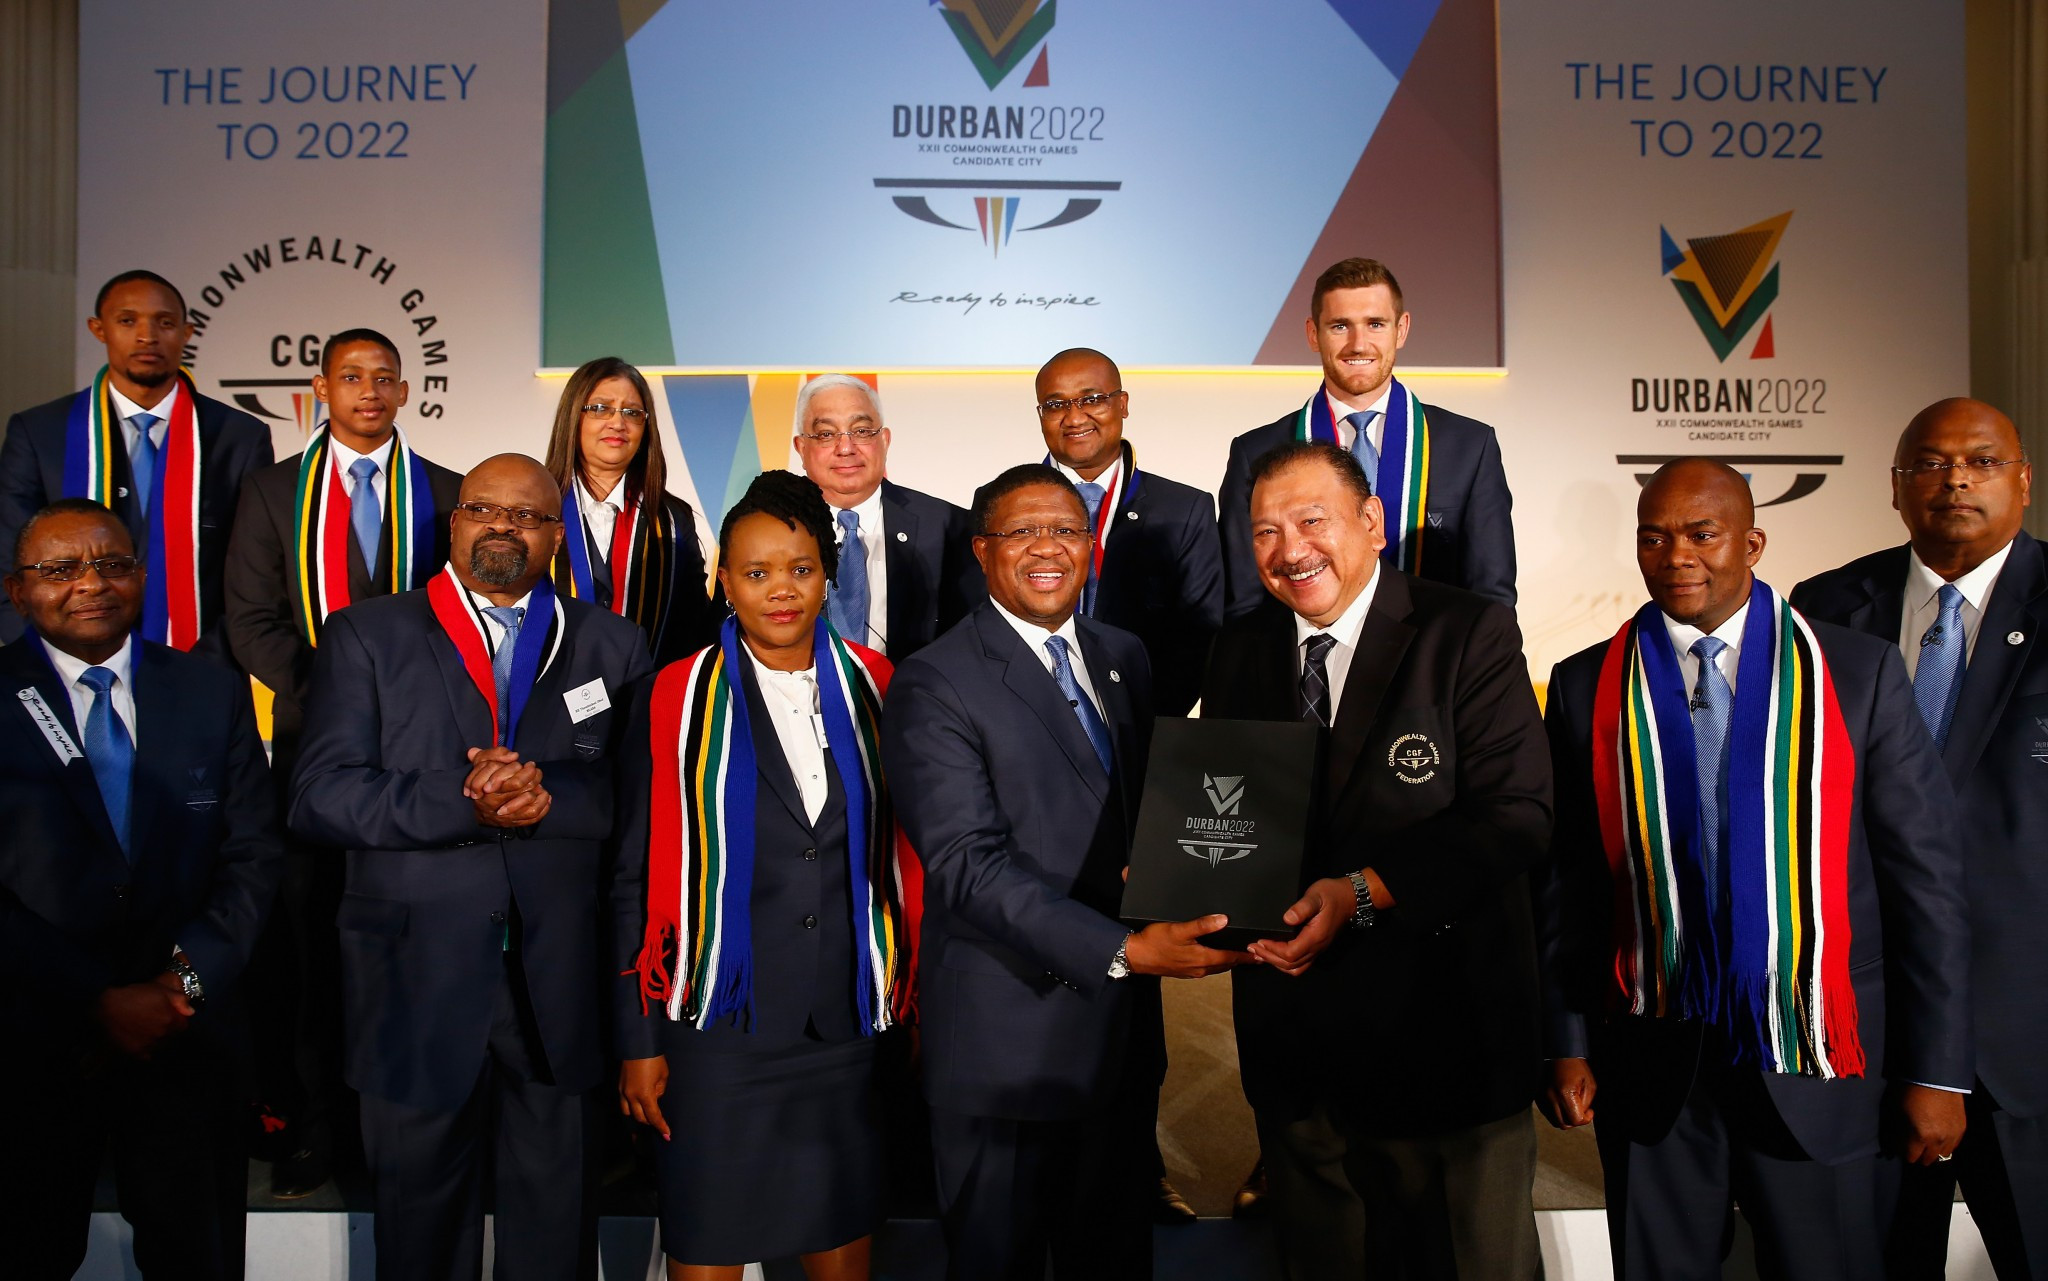 Tubby Reddy, far right, led Durban's successful bid for the 2022 Commonwealth Games only for the South African city to be later stripped of the event after failing to meet a series of financial deadlines ©Getty Images